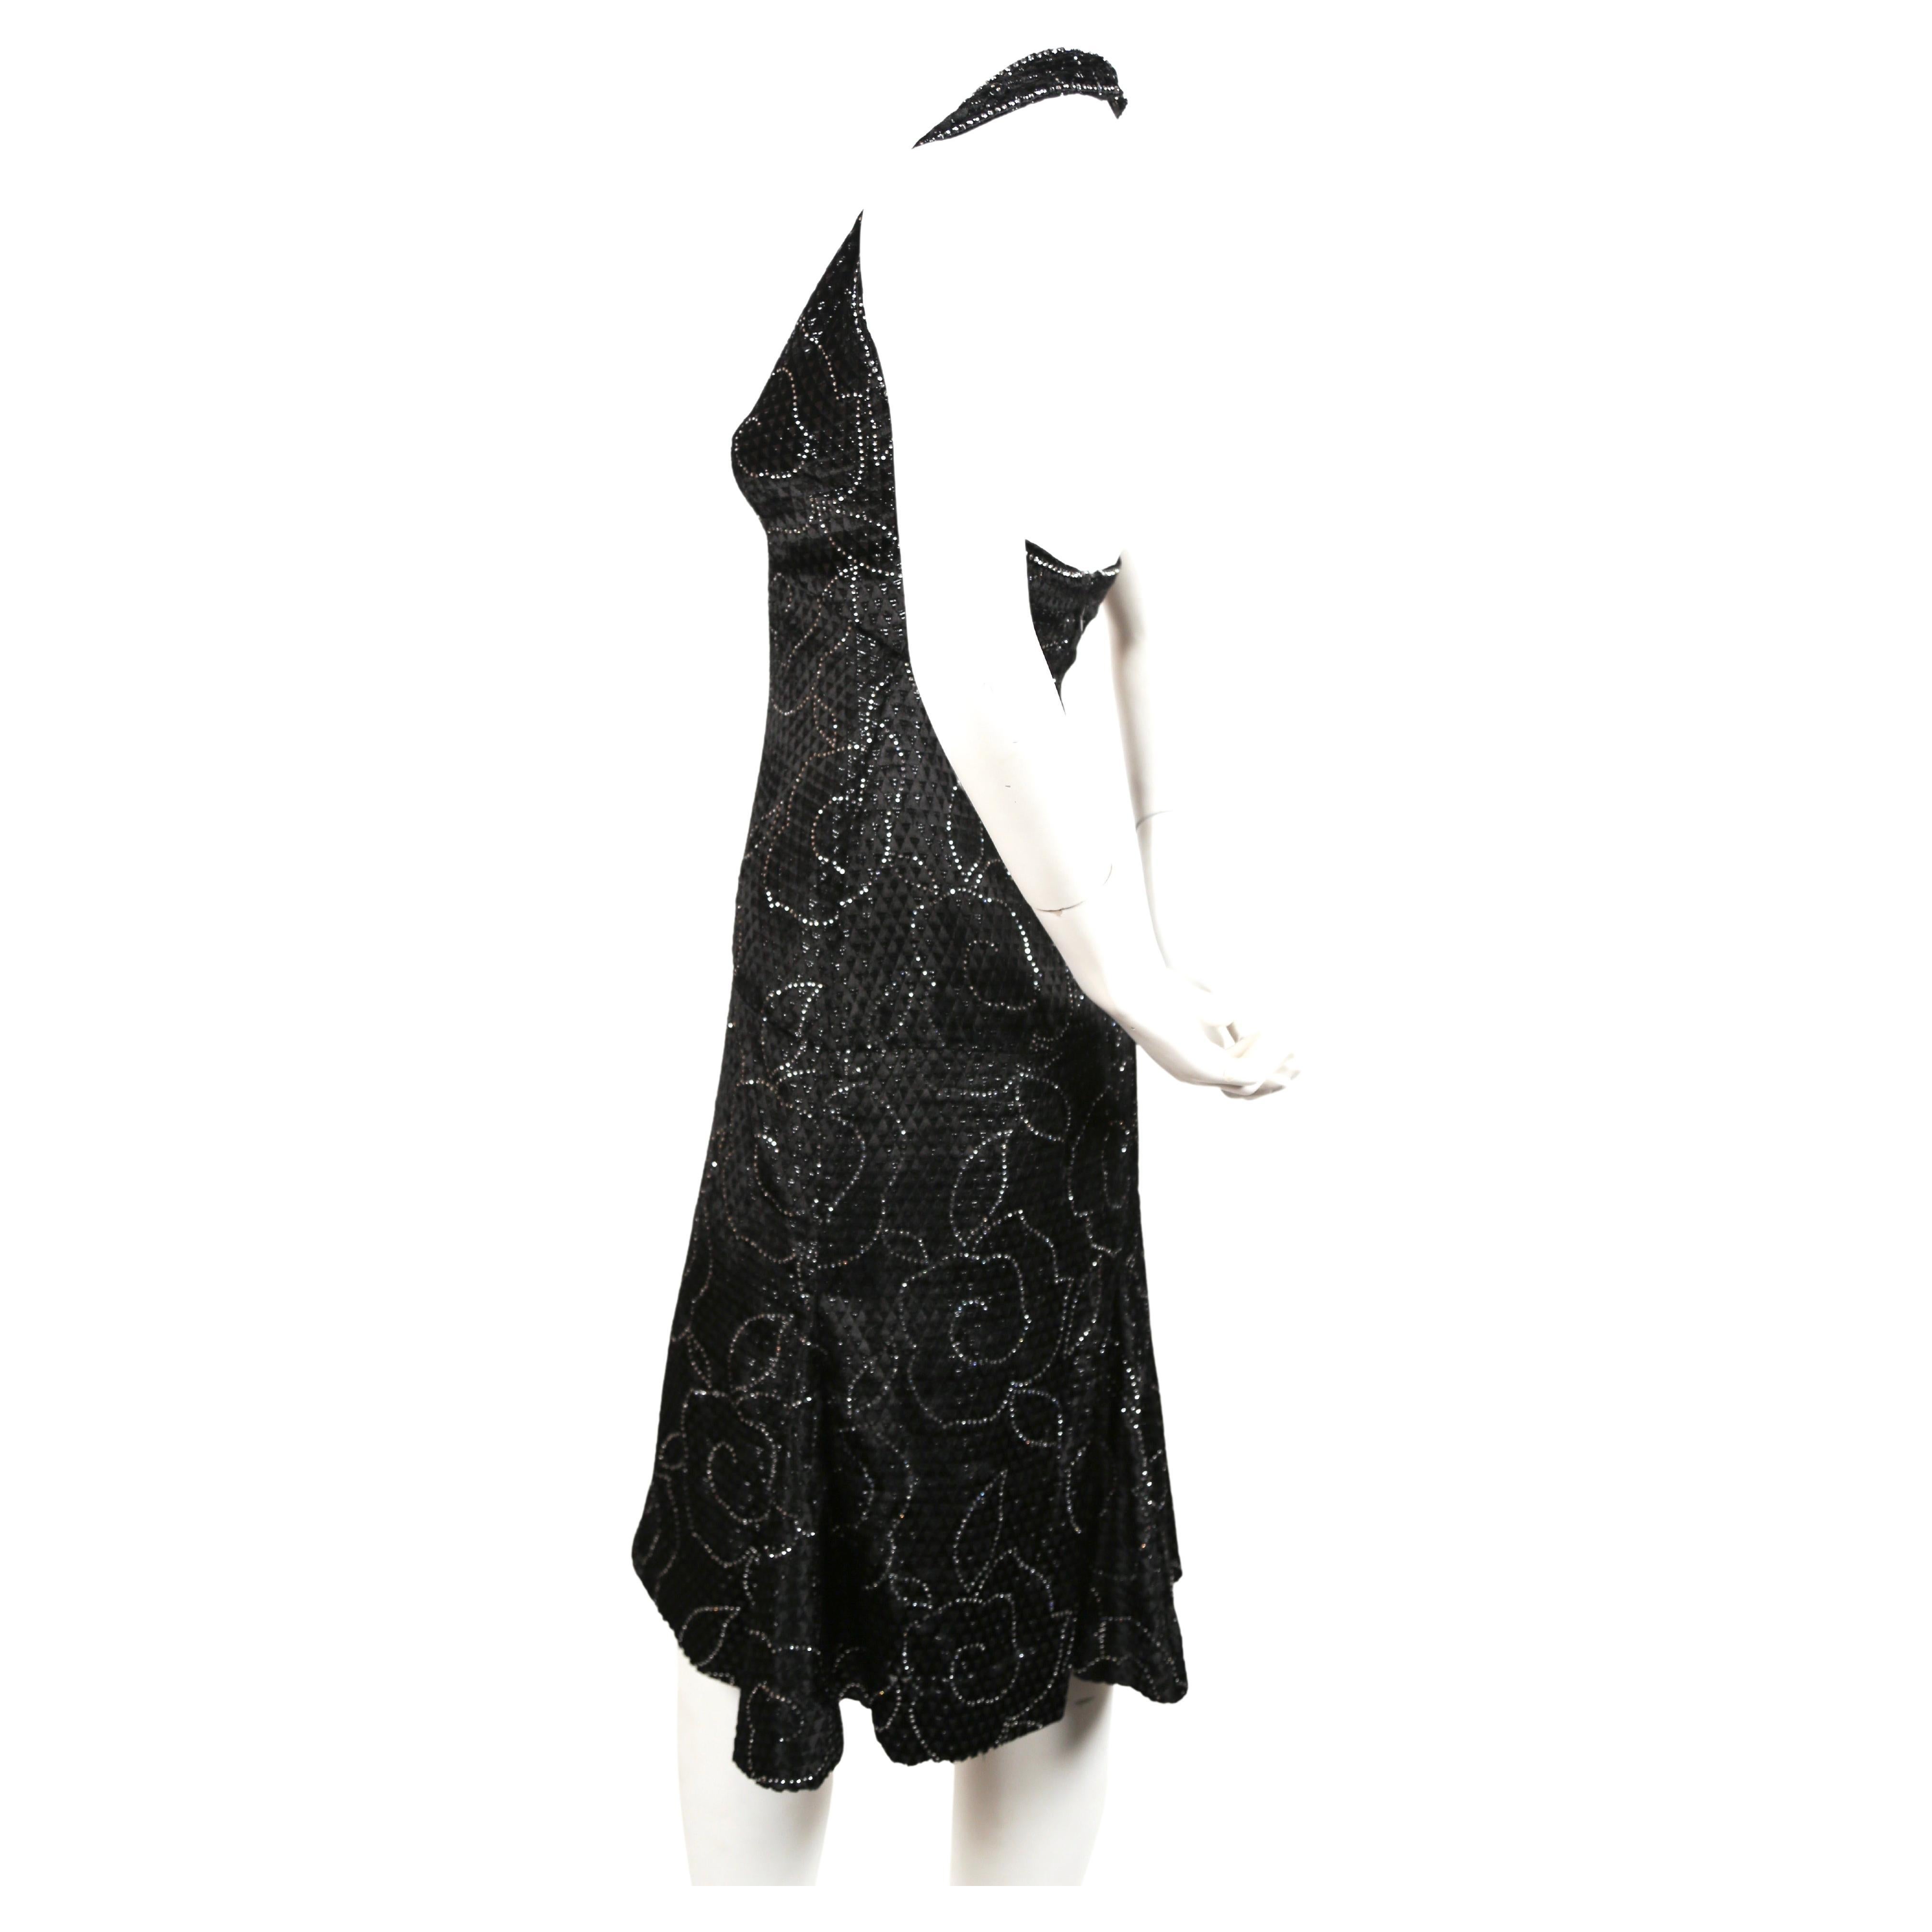 Very rare, haute couture, silk velvet dress with rhinestones from Pierre Balmain dating to the 1960's. Fabric is a cut silk velvet with an interesting diamond shaped pattern throughout. Dress best fits a US size 2-4 (short waisted). Dress measures